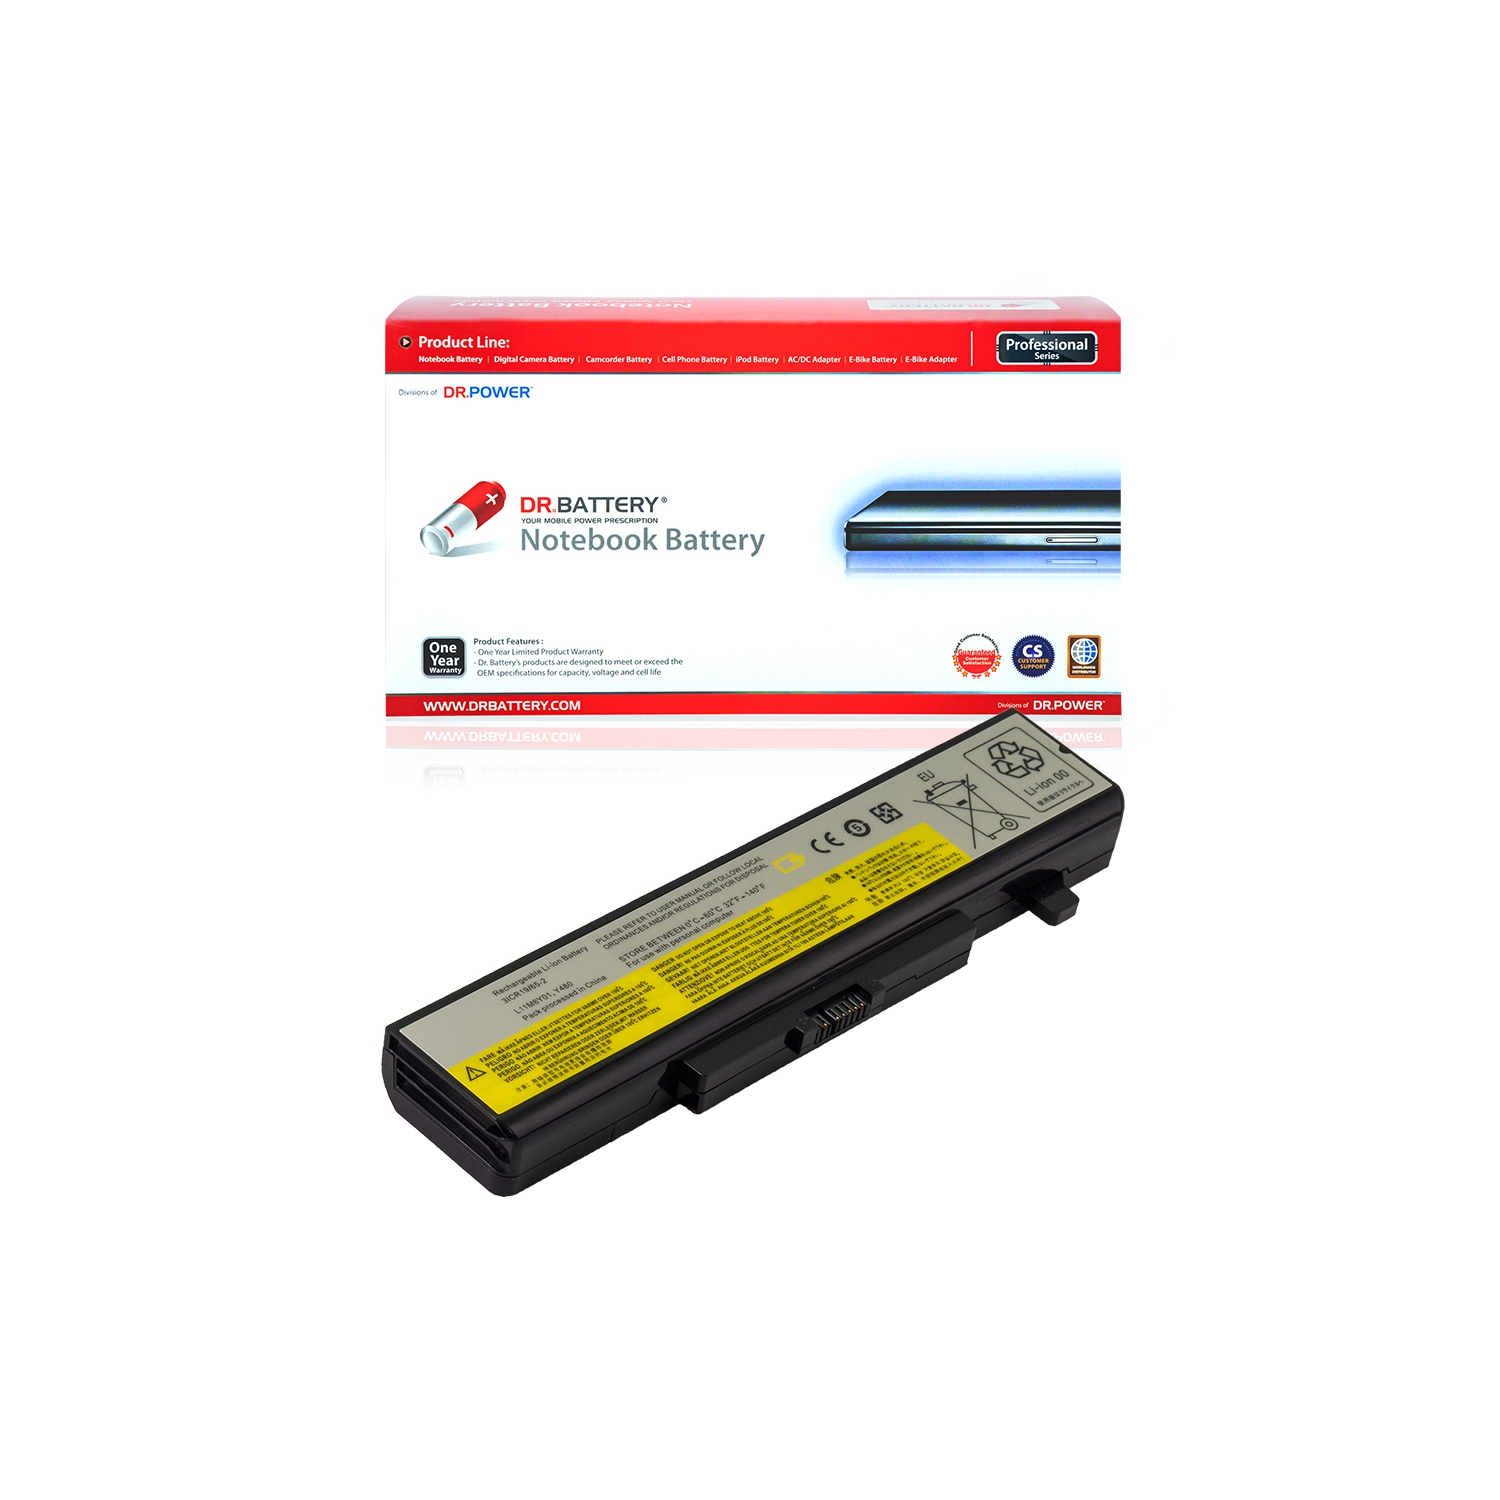 DR. BATTERY - Replacement for Lenovo IdeaPad Y480 / Y480P / Y485 / Y580 / Y580P / L11N6Y01 / L11P6R01 / L11S6F01 / L11S6Y01